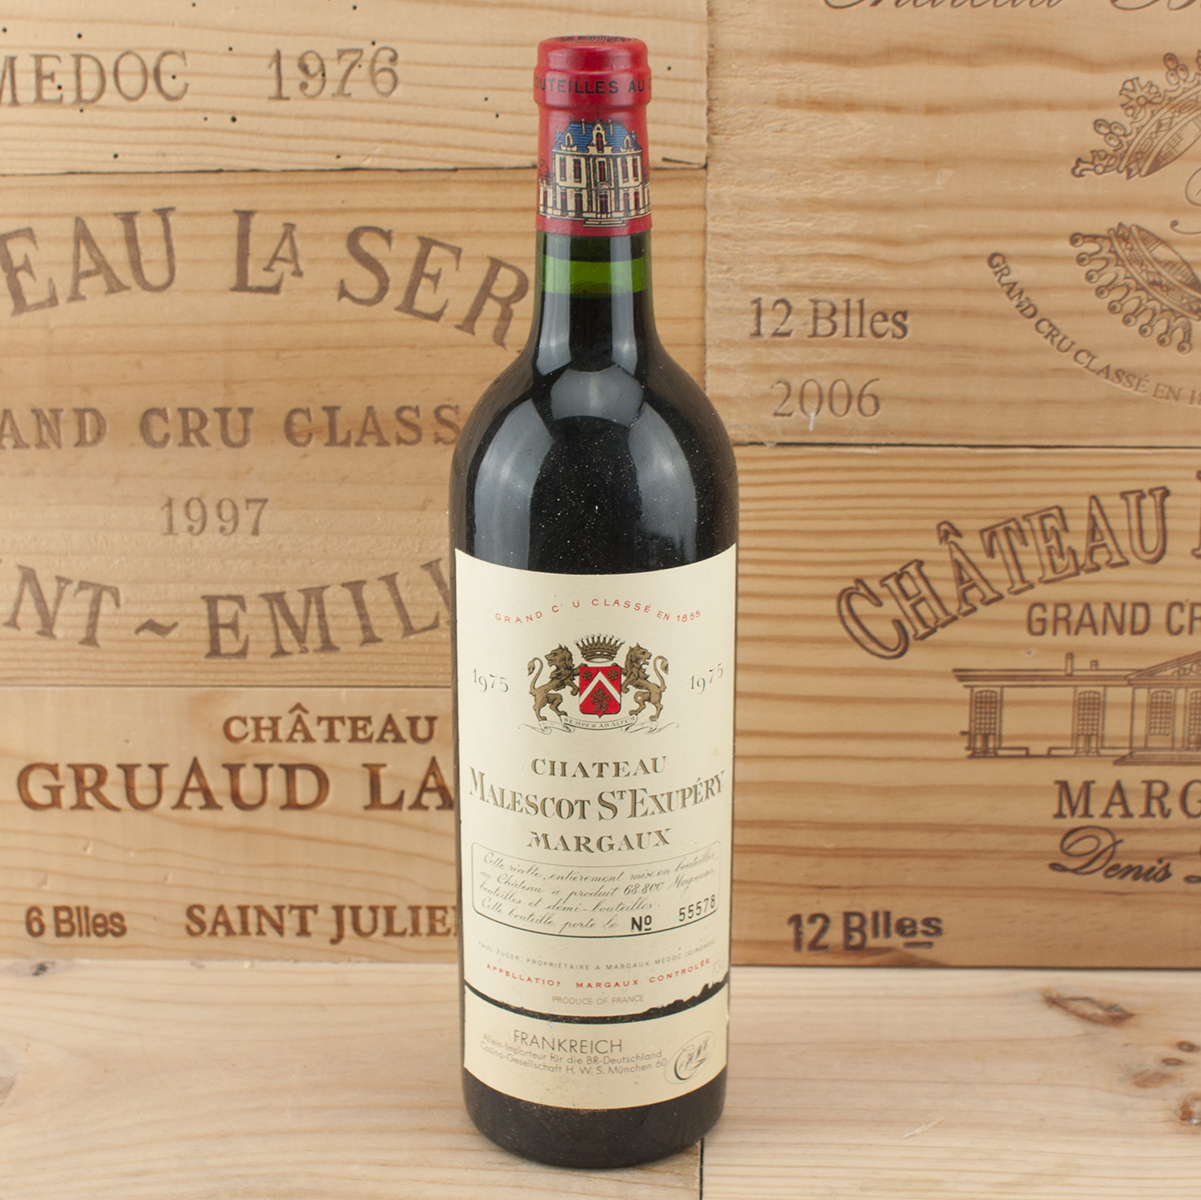 1975 Chateau Malescot St. Exupery